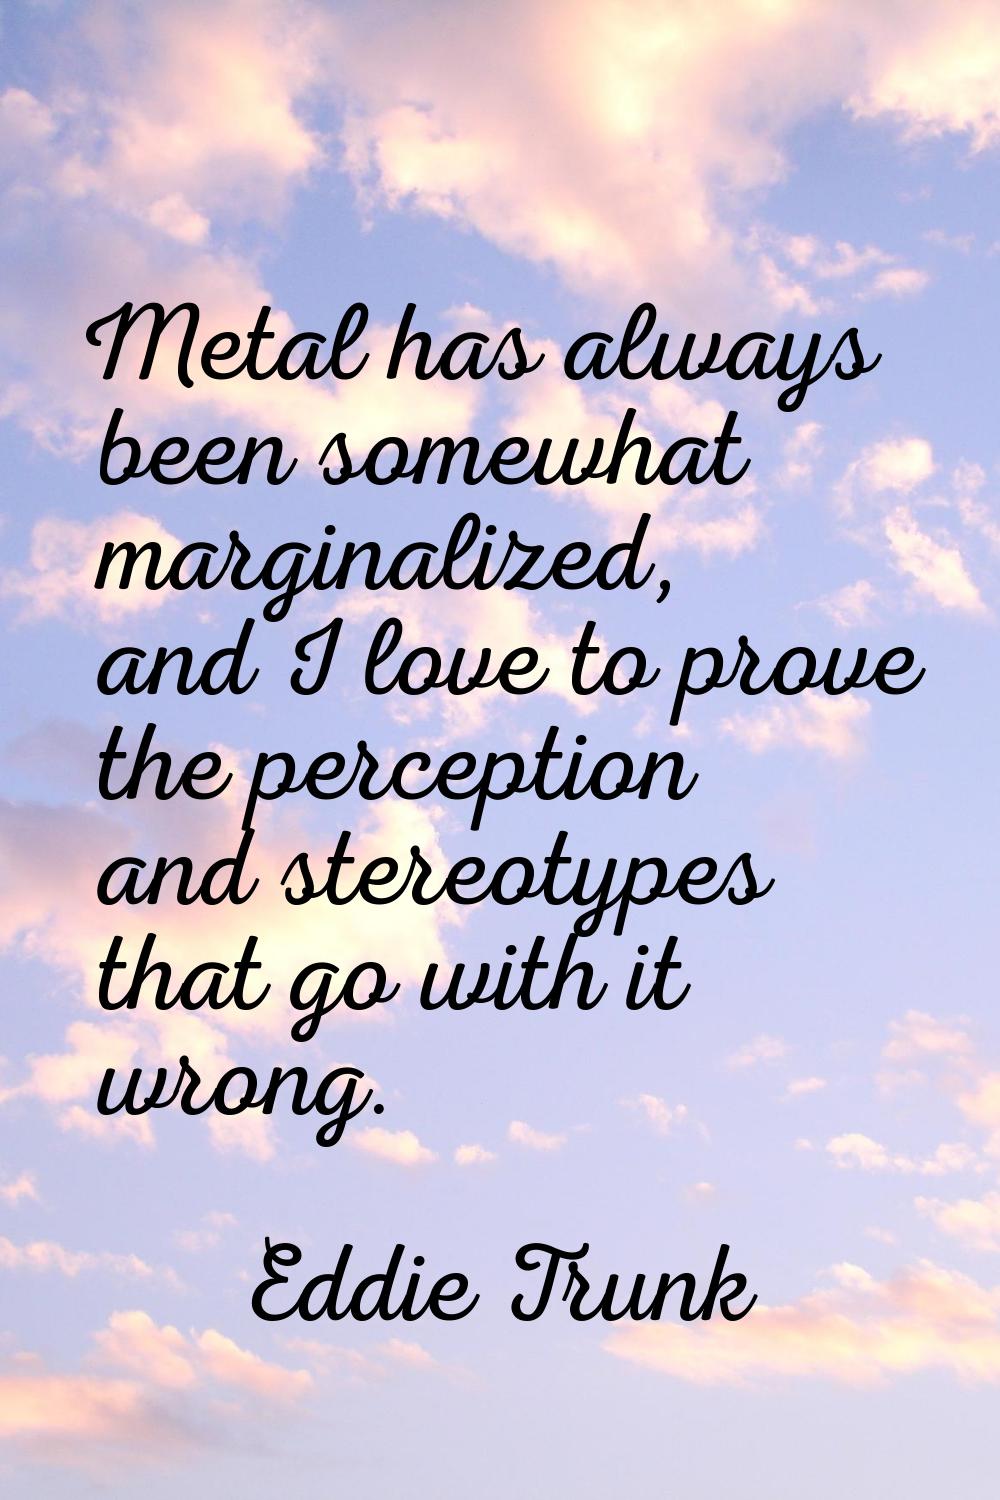 Metal has always been somewhat marginalized, and I love to prove the perception and stereotypes tha